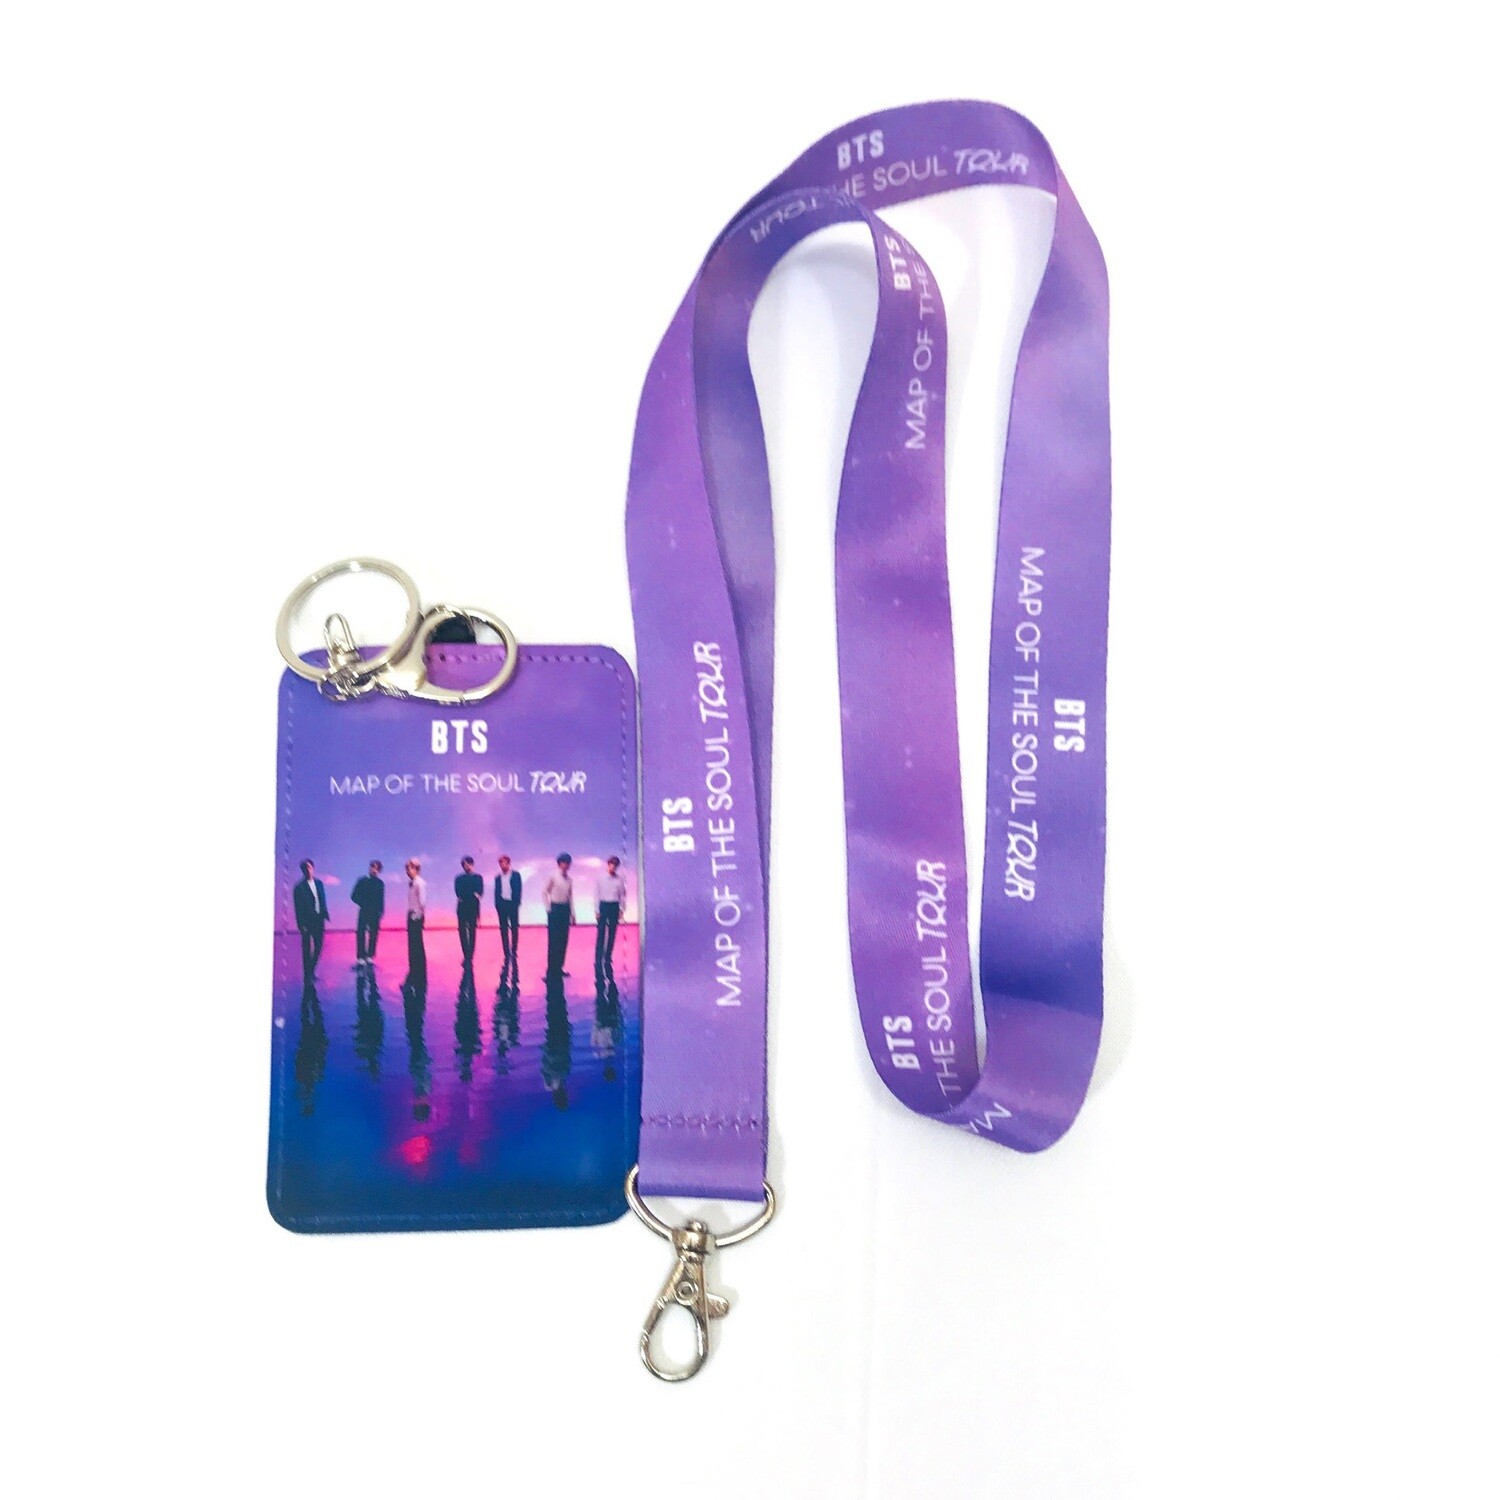 BTS Map of the Soul Tour Lanyard and ID Wallet Combo